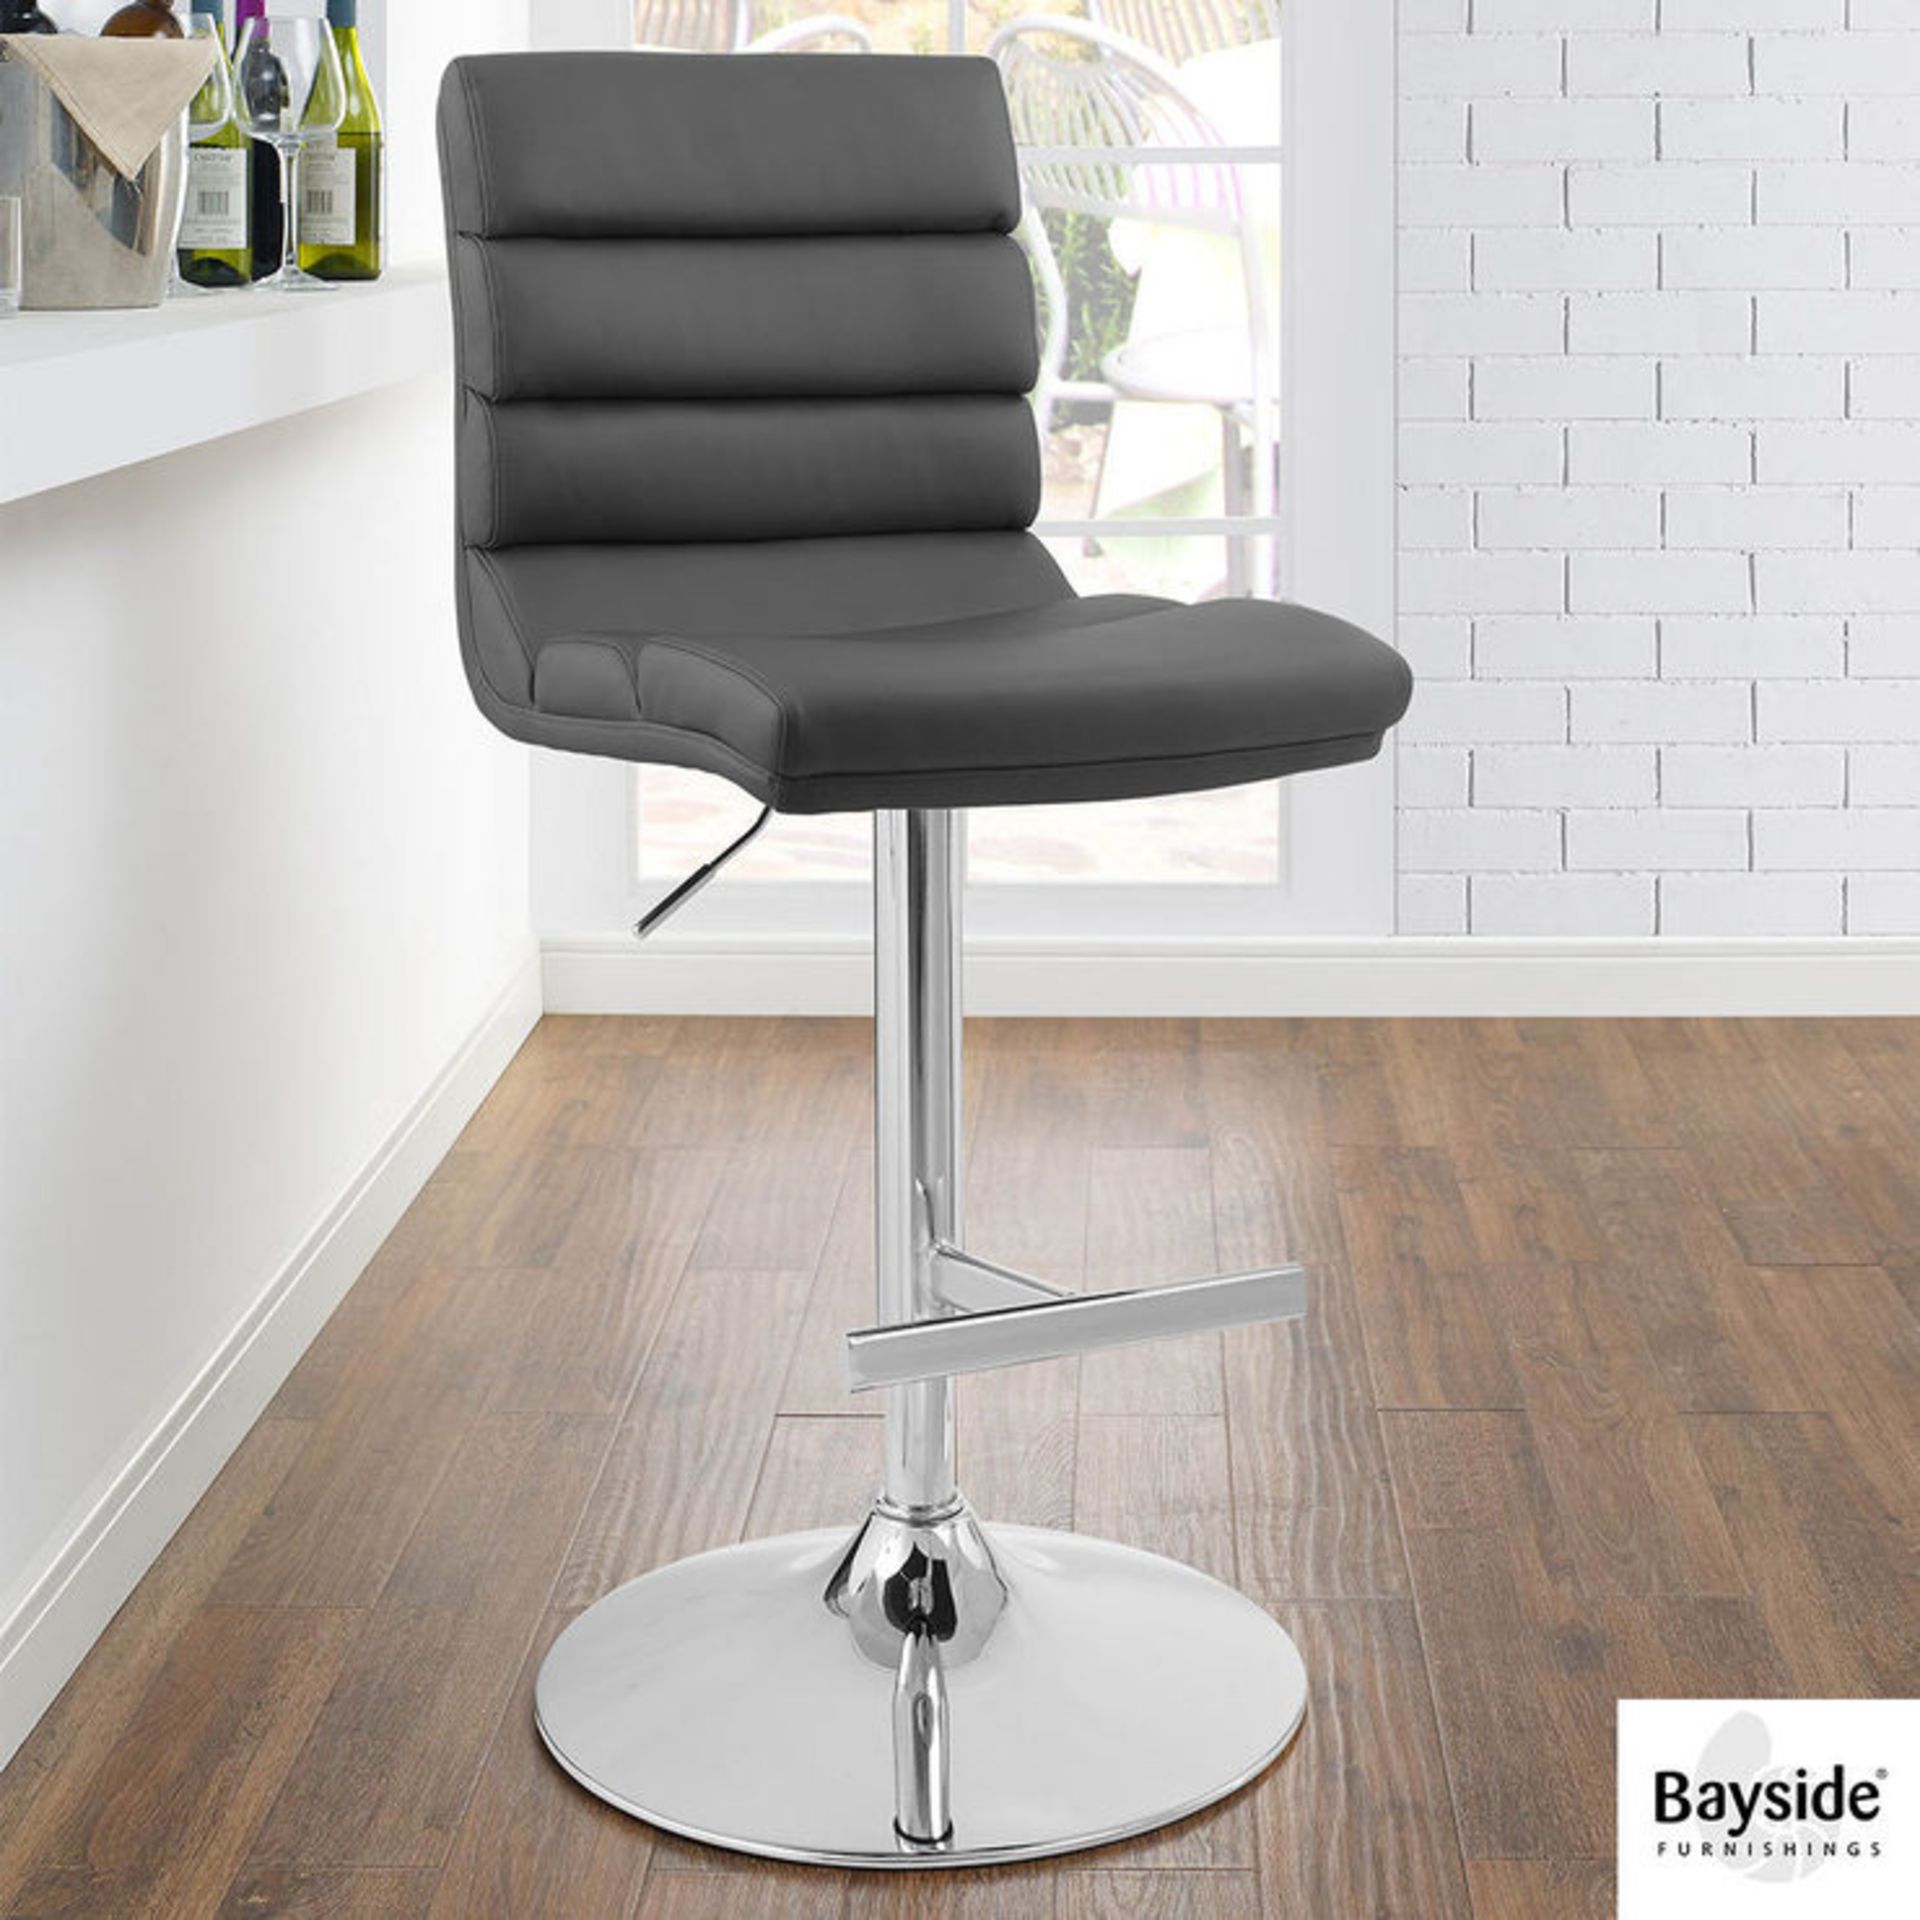 1 BAYSIDE FURNISHINGS GREY FAUX LEATHER GAS LIFT BAR STOOL RRP Â£119 (GENERIC IMAGE GUIDE)